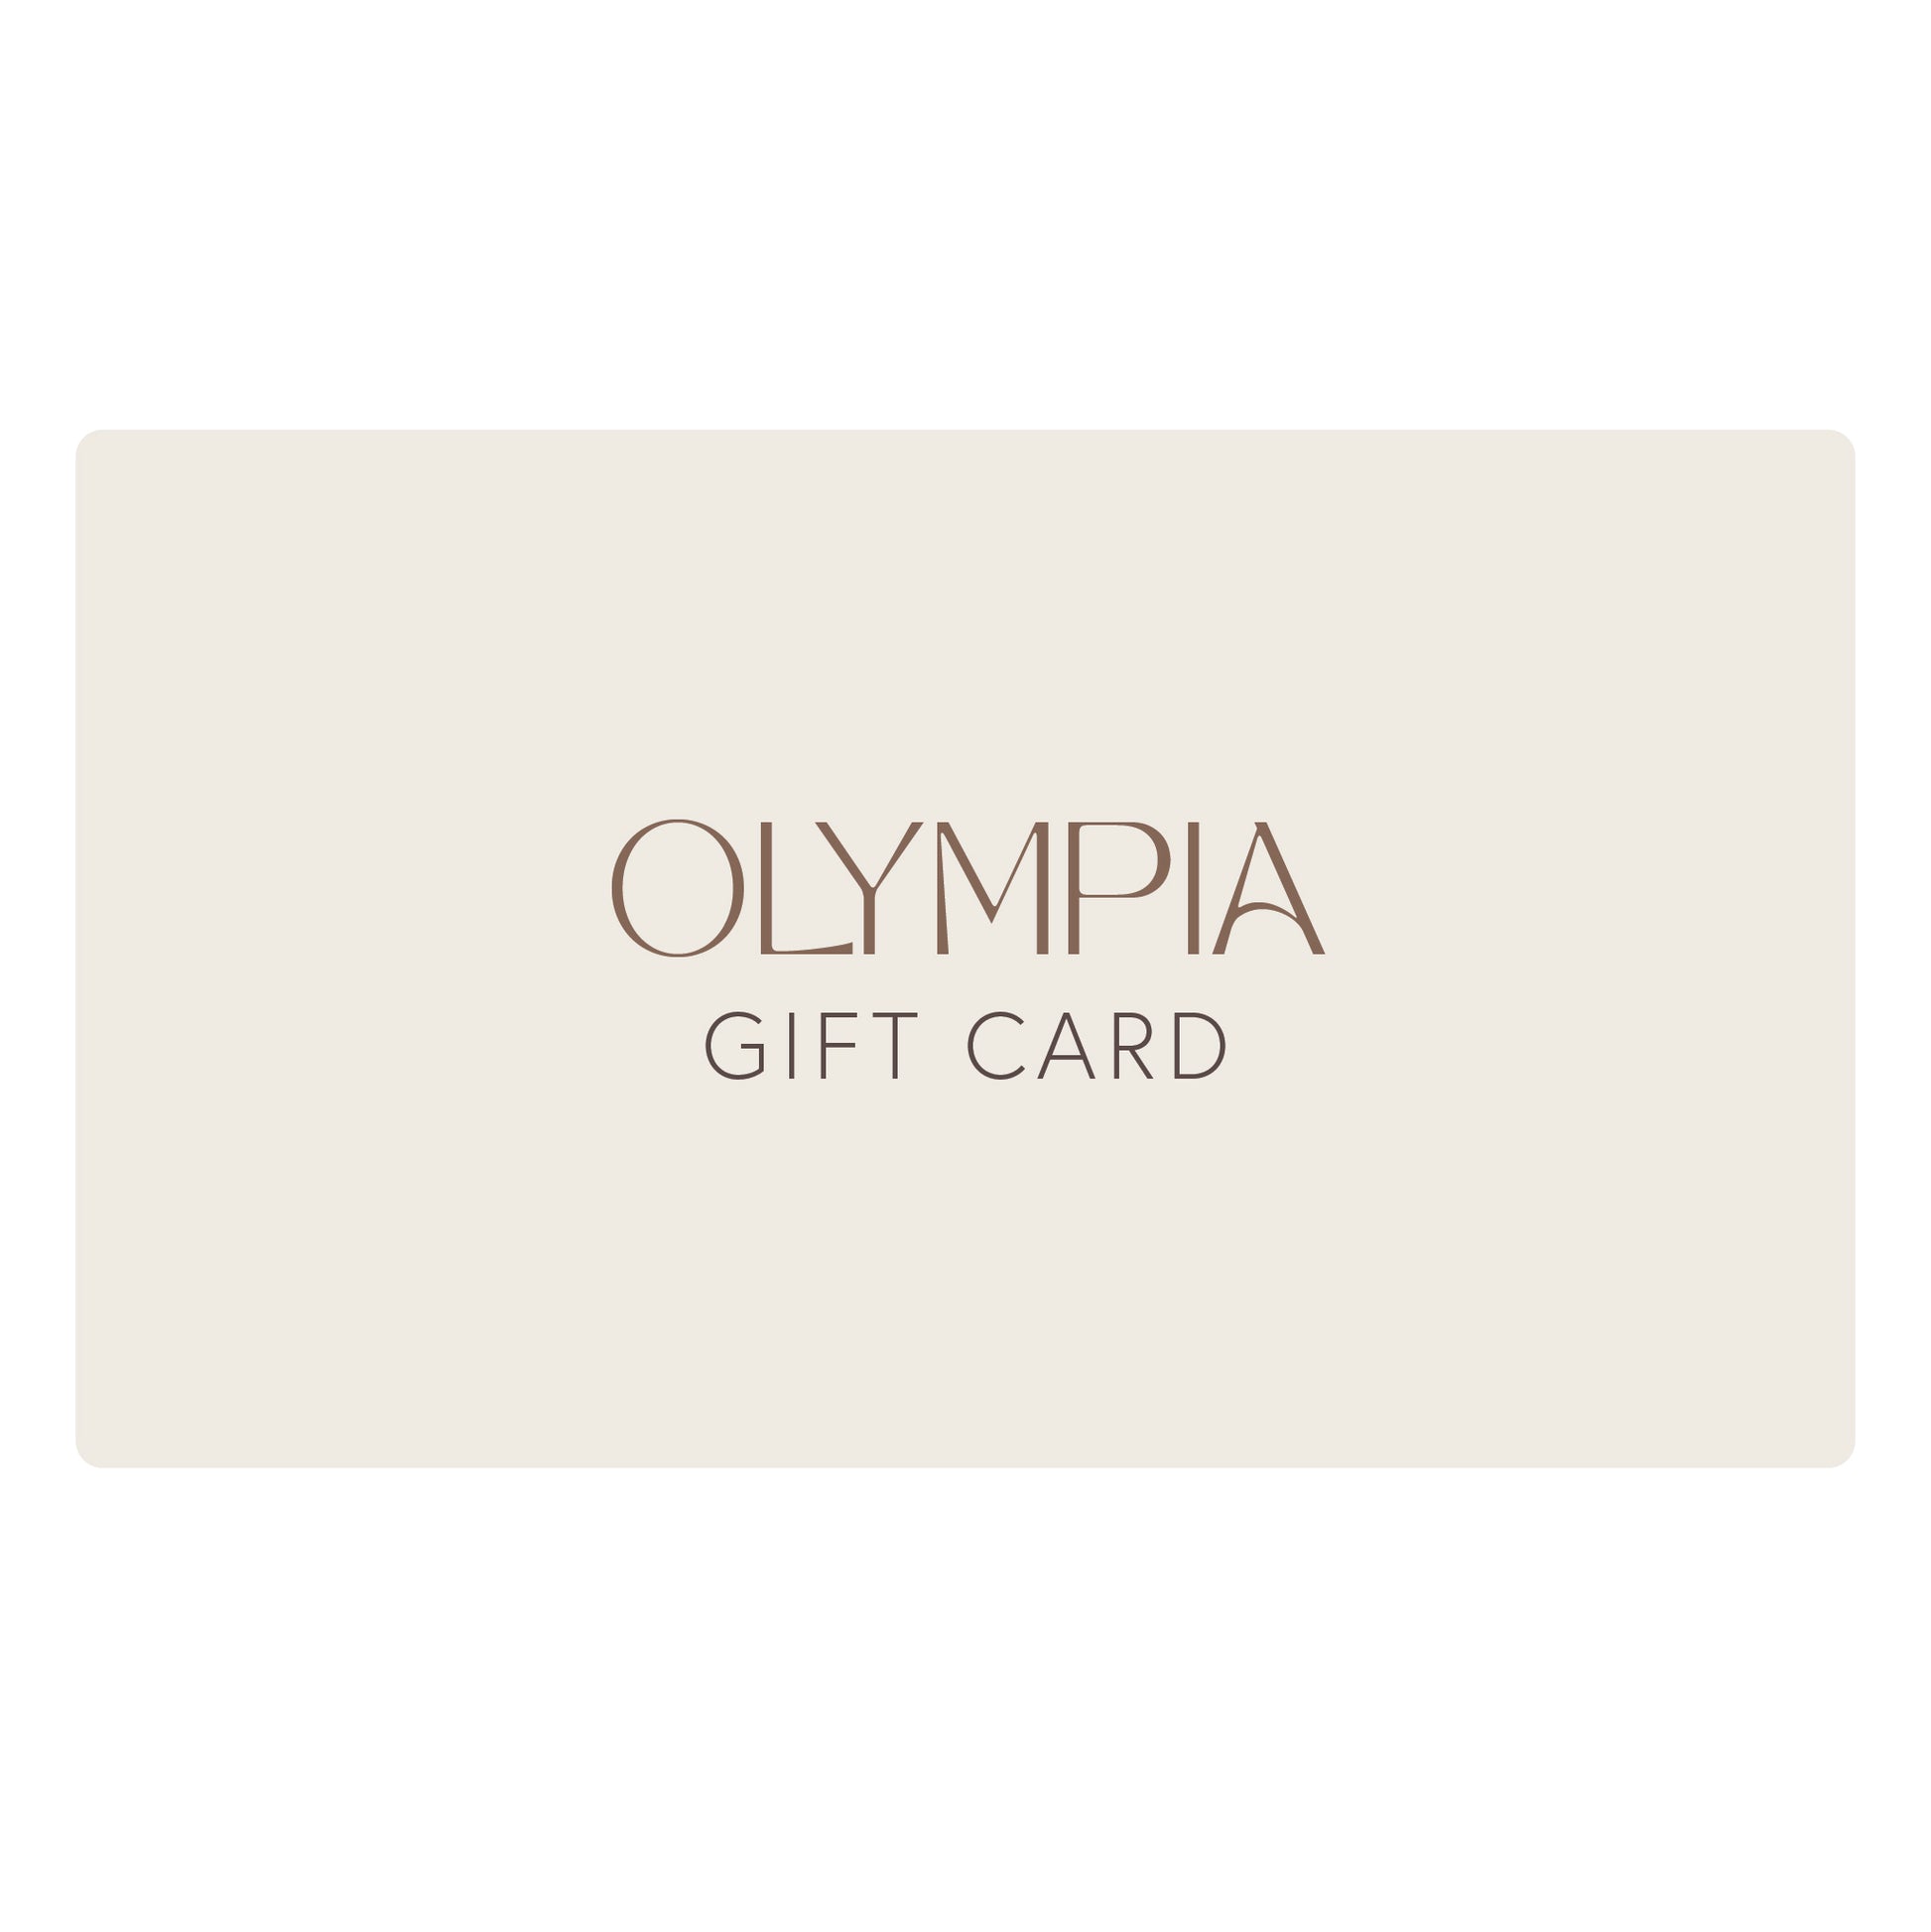 Olympia Gift Card